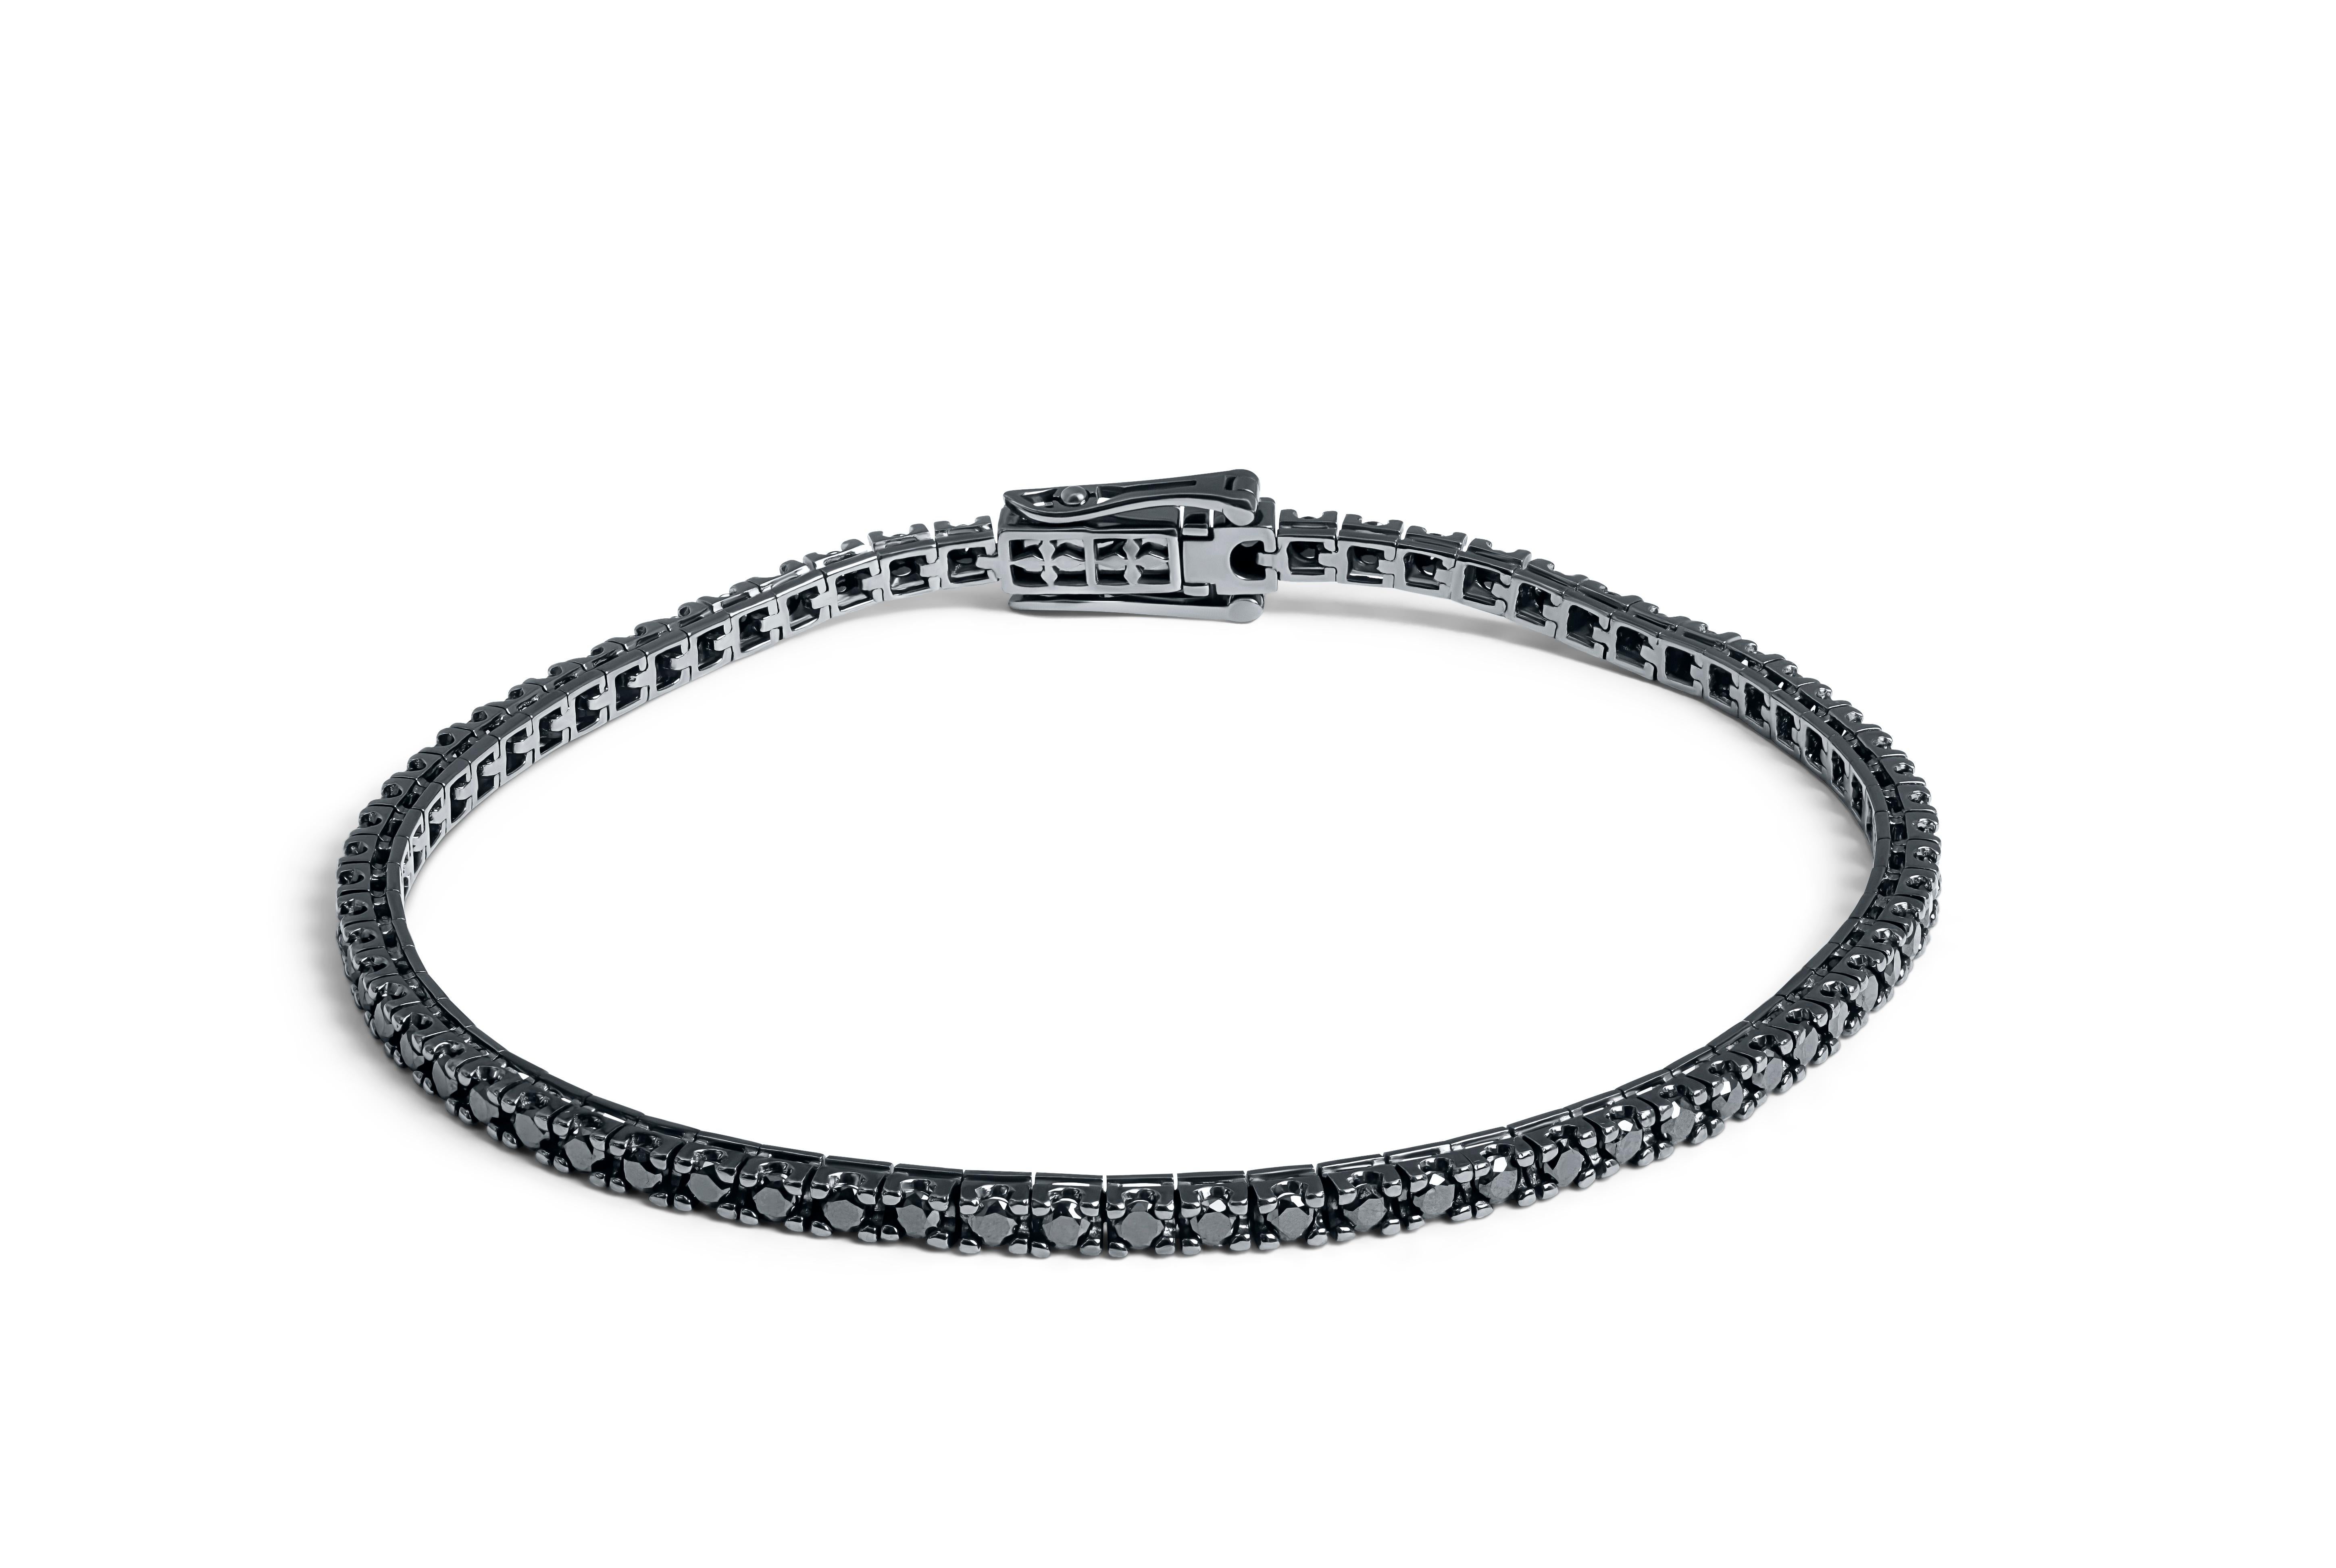 18K White Gold Tennis bracelet in black rhodium plating with Blue Diamonds - M In New Condition For Sale In Fulham business exchange, London